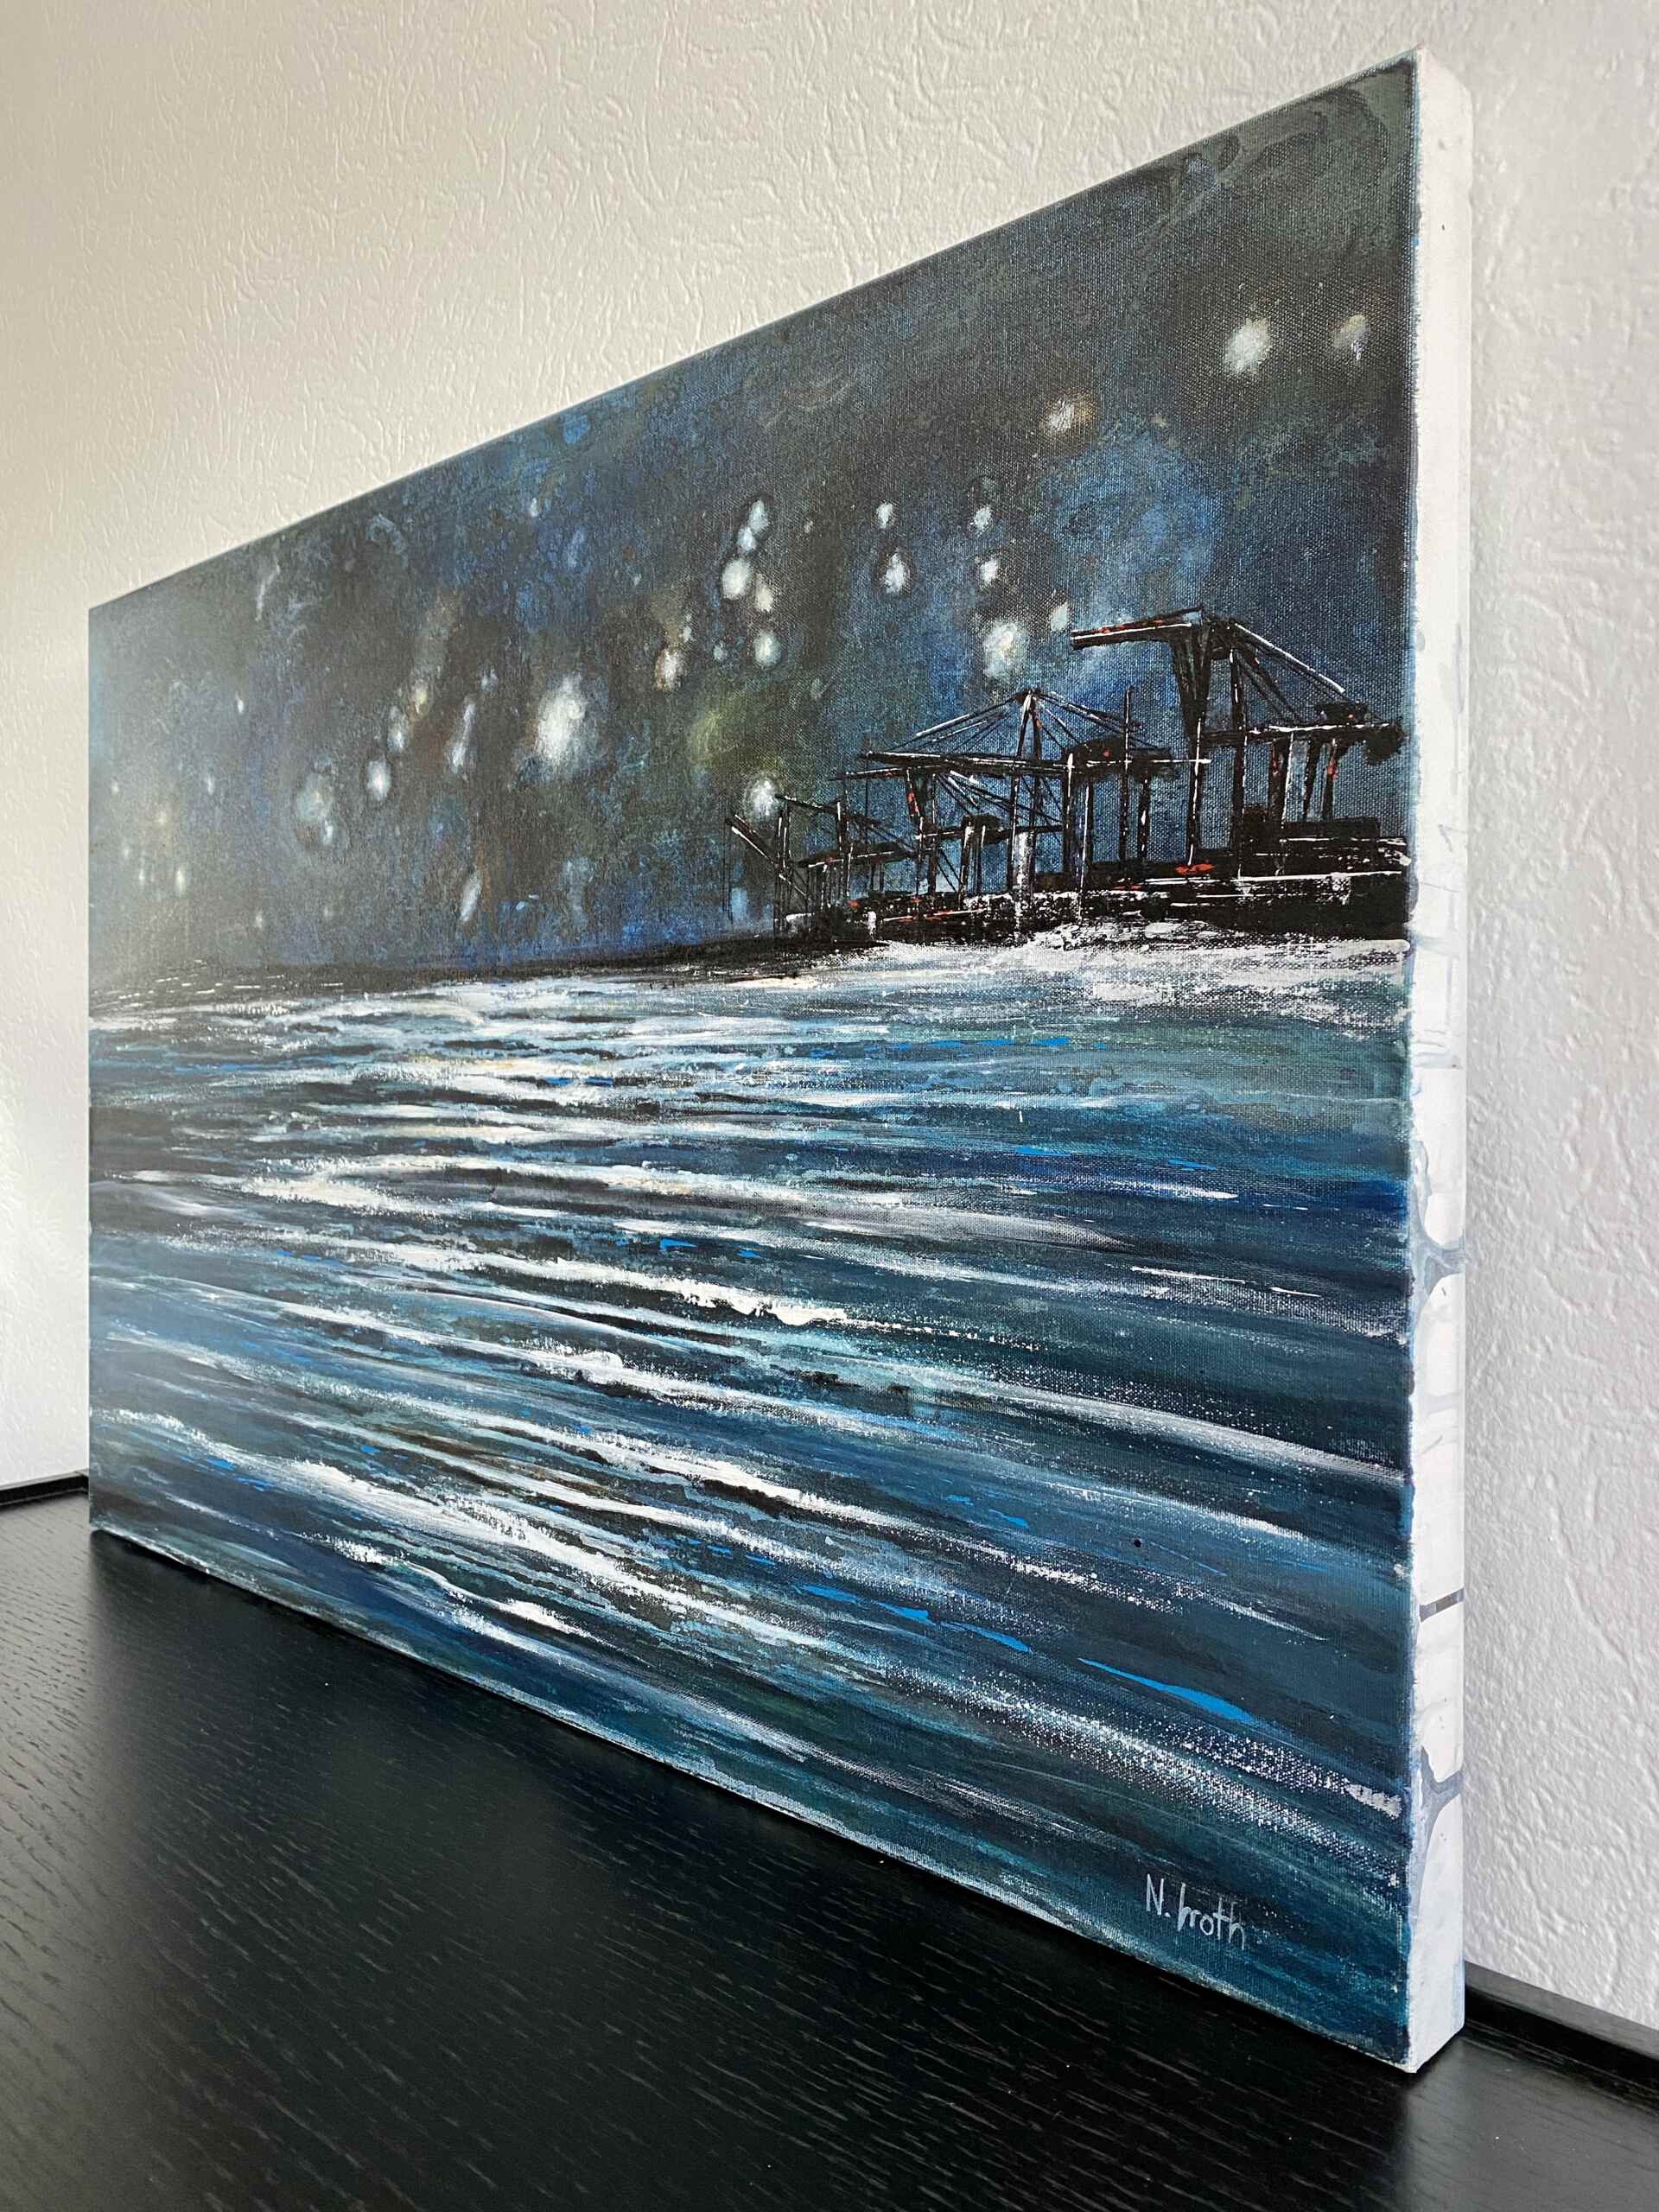 Side view of artwork "Just the Surf" by Nina Groth